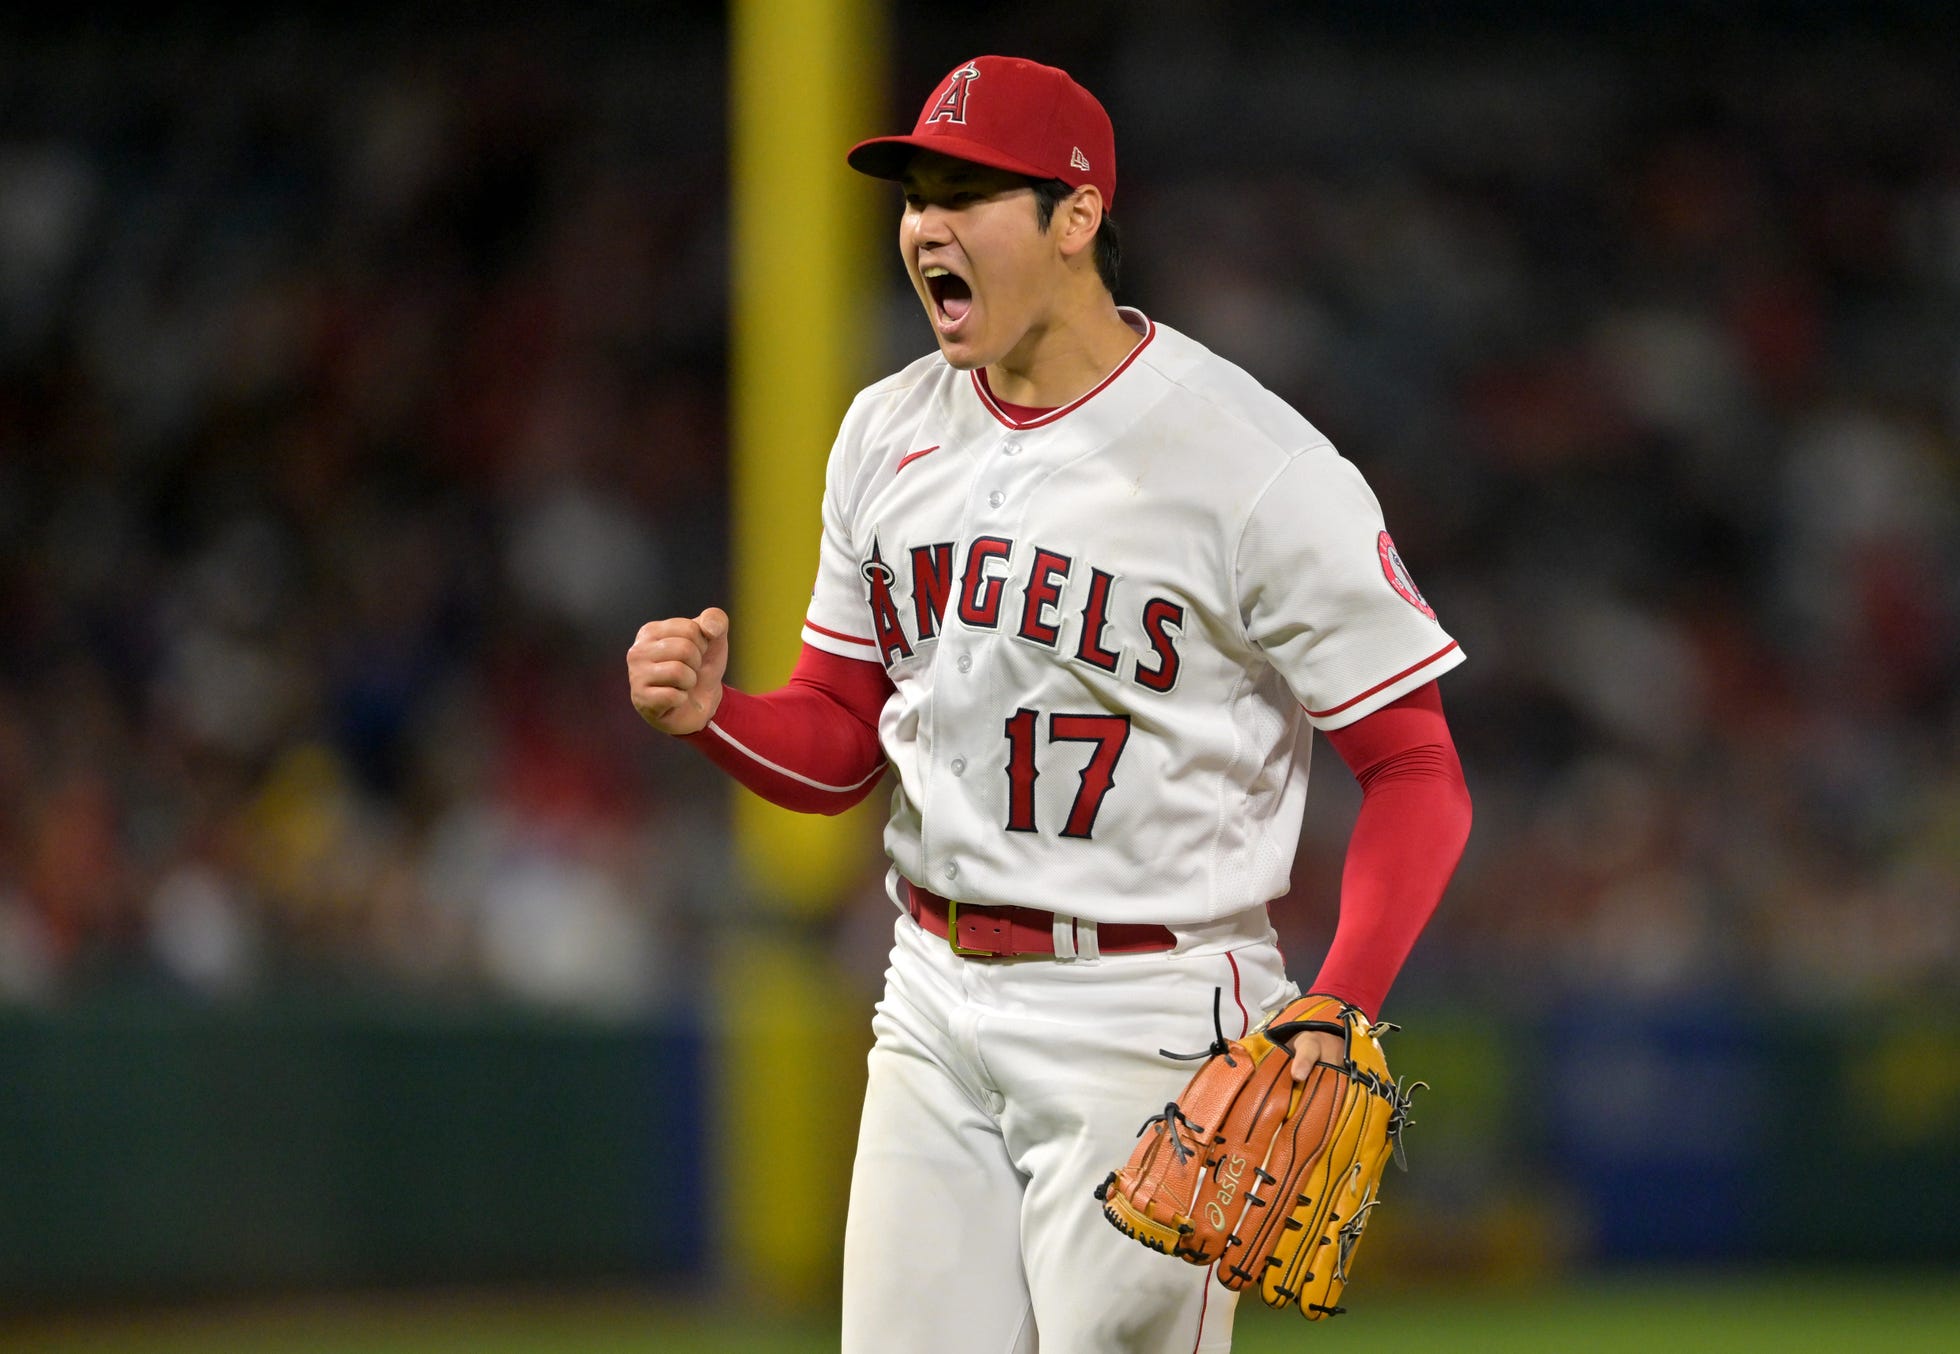 Shohei Ohtani contract What is twoway star worth? Free agency nears